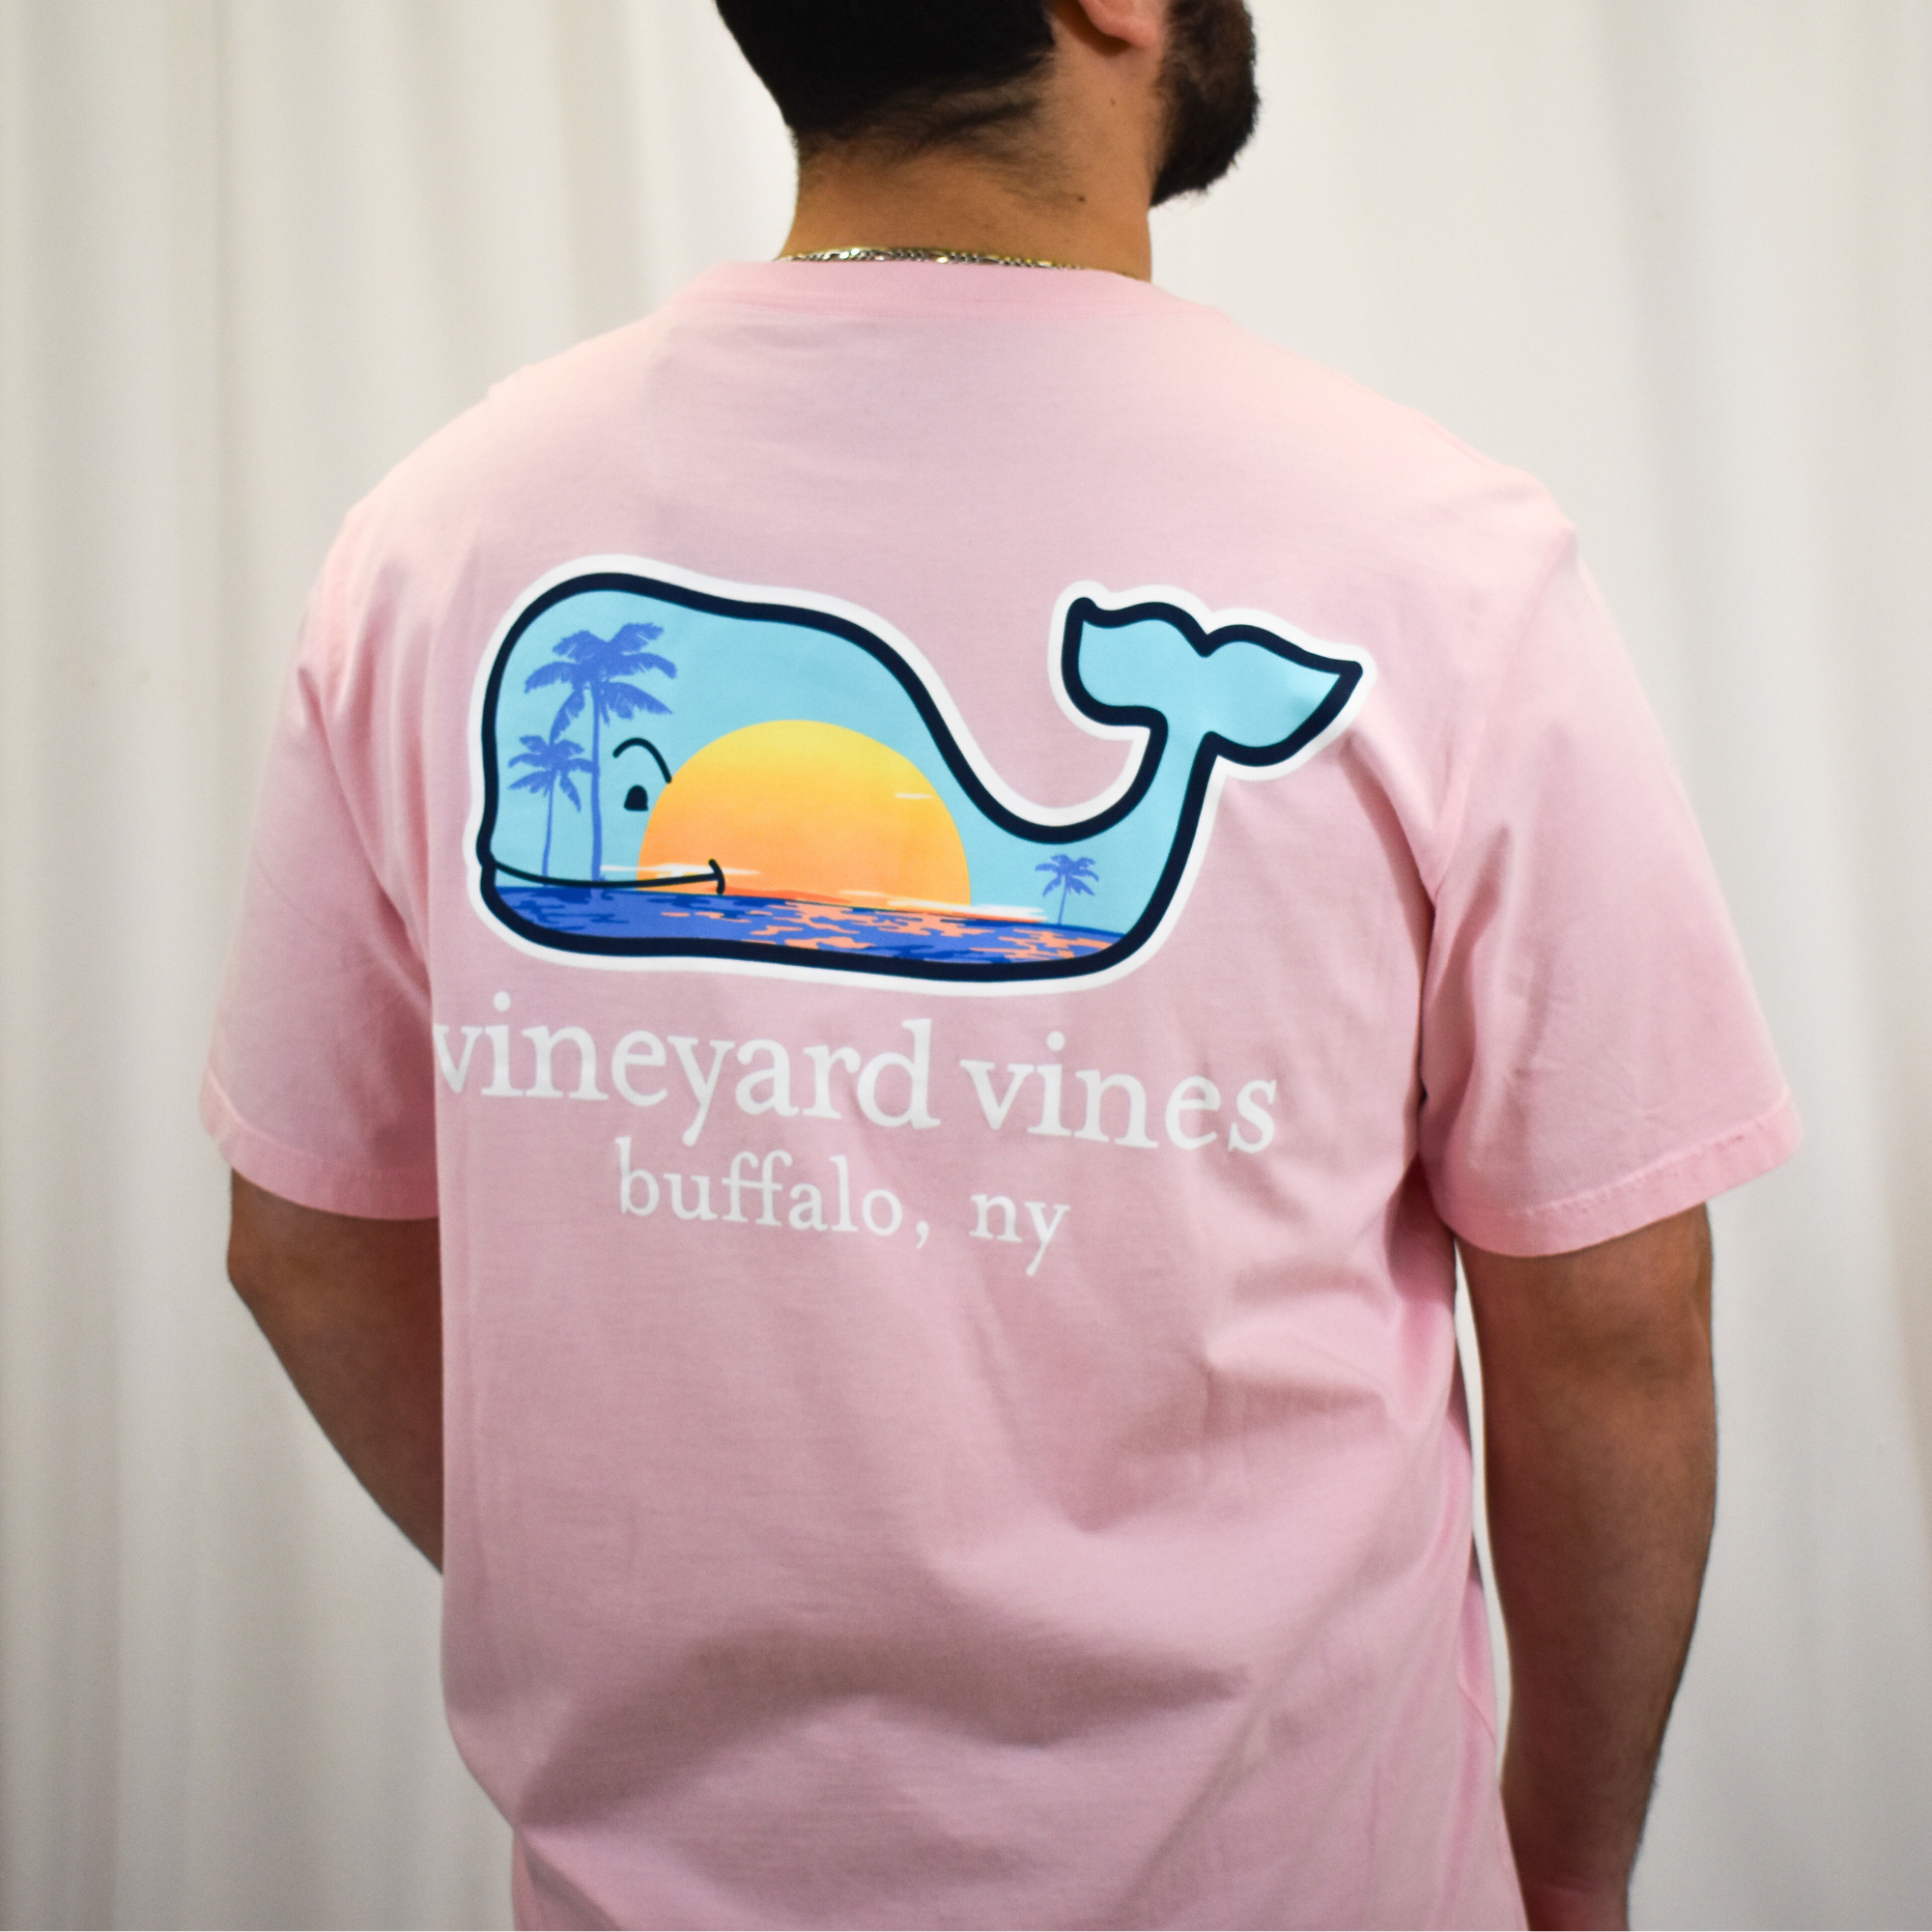 photo of the back of guy wearing a vineyard vines pink showing and showing the whale design